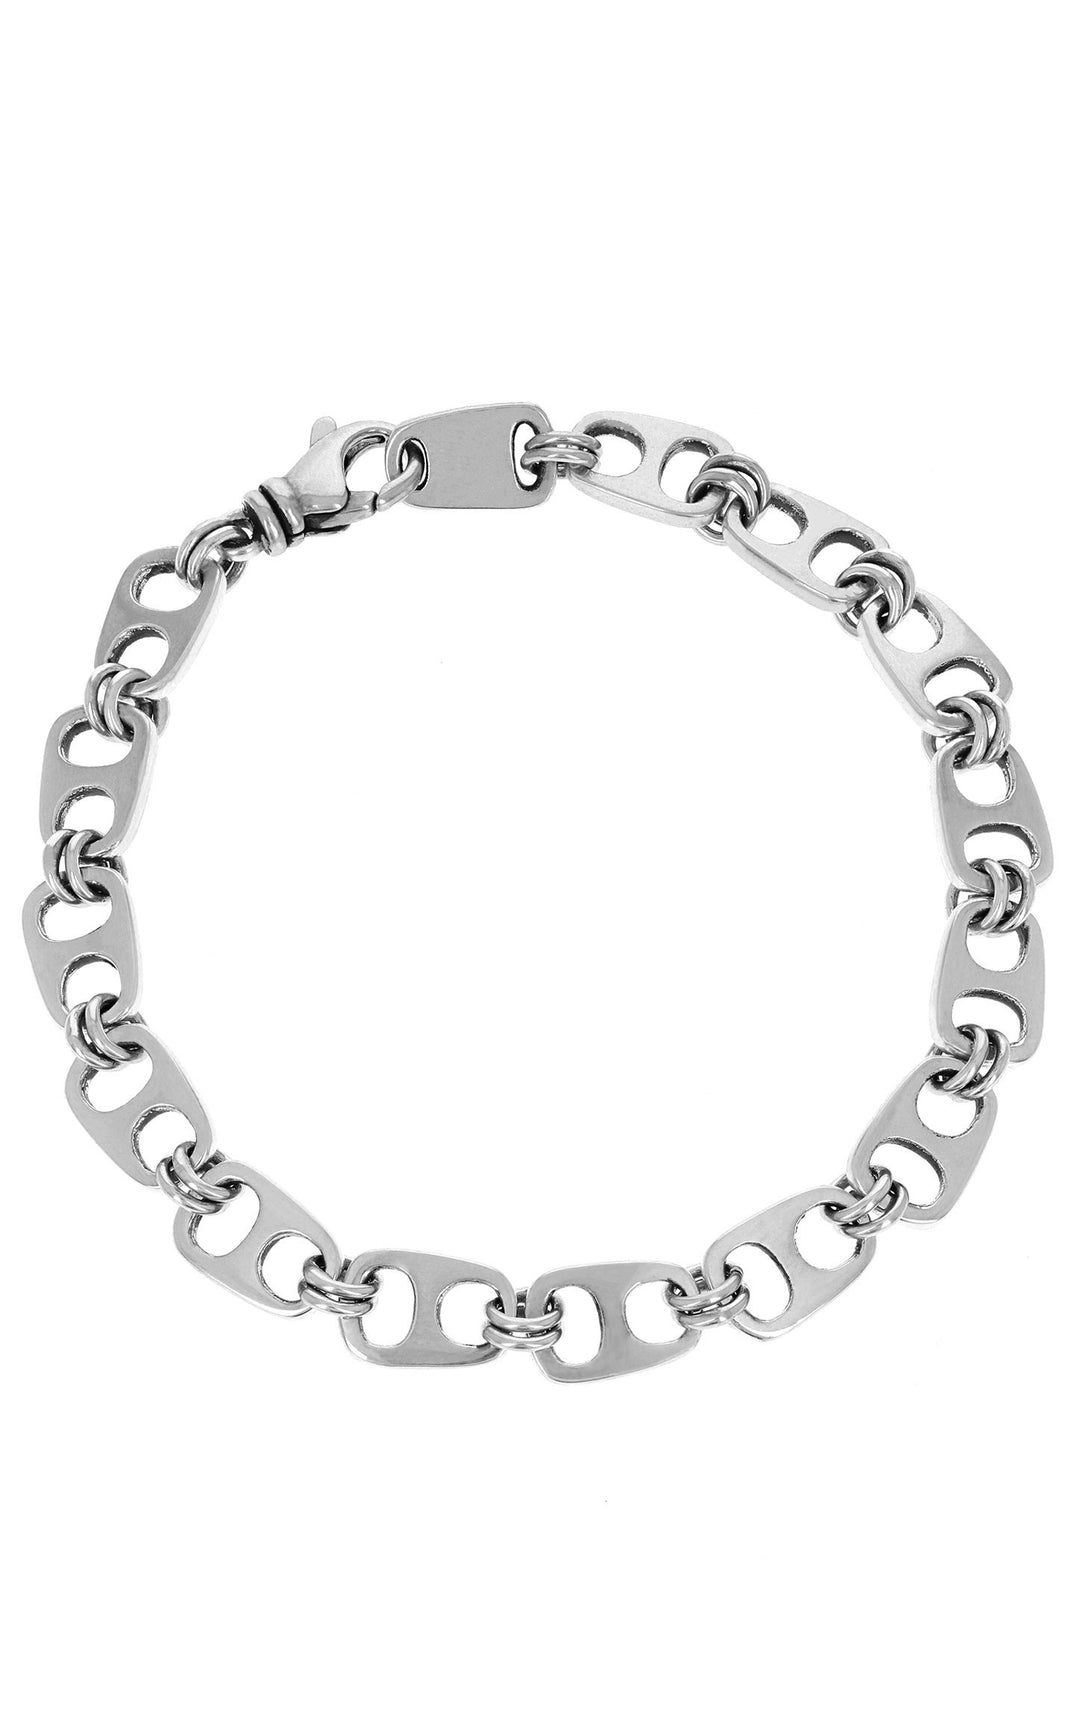 Small Single Layer Pop Top Bracelet With Clasp